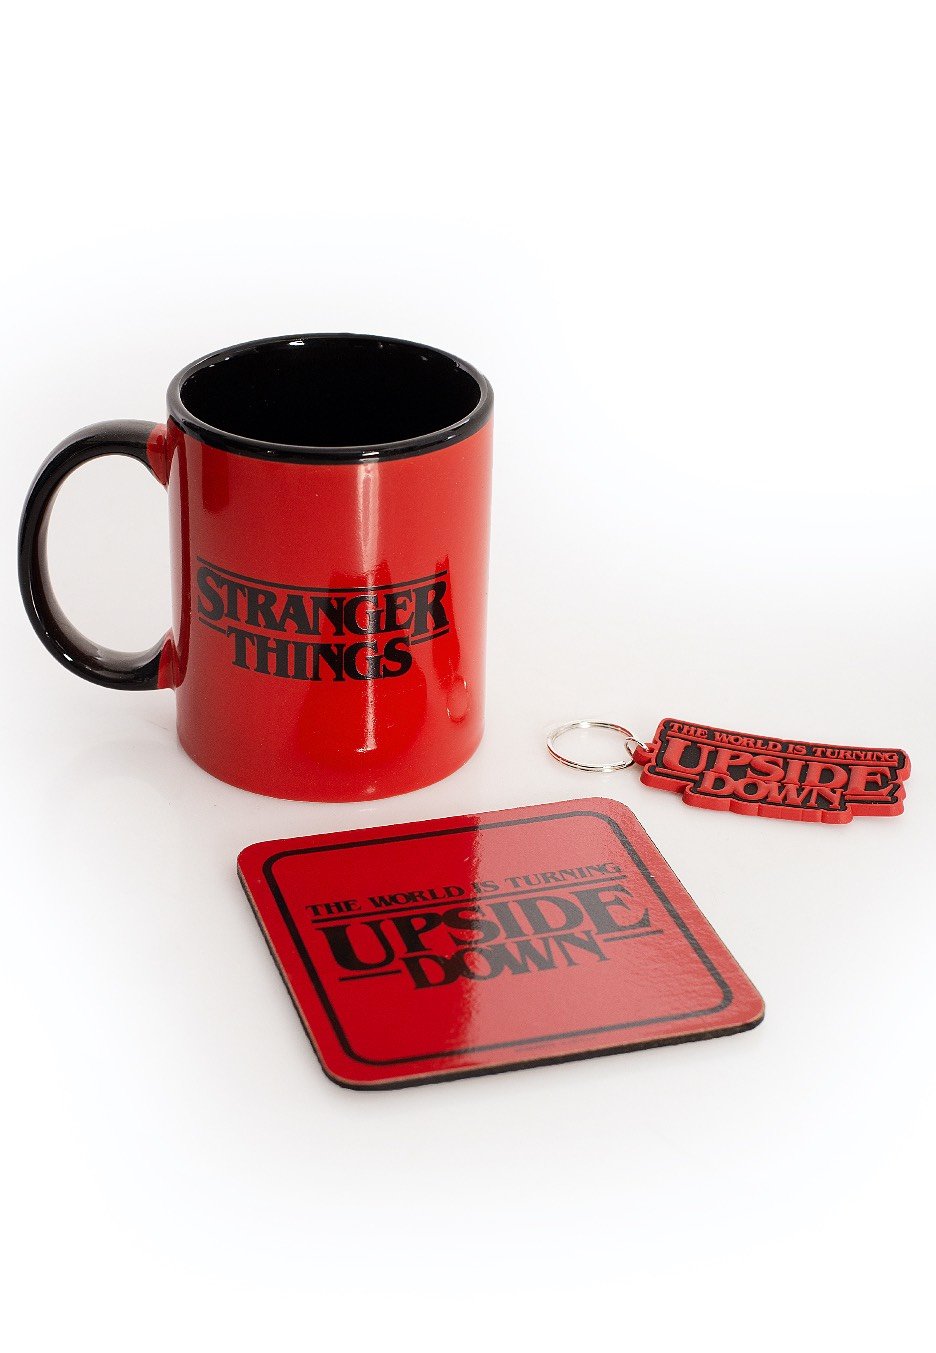 Stranger Things - The World Is Turning Upside Down - Gift Box